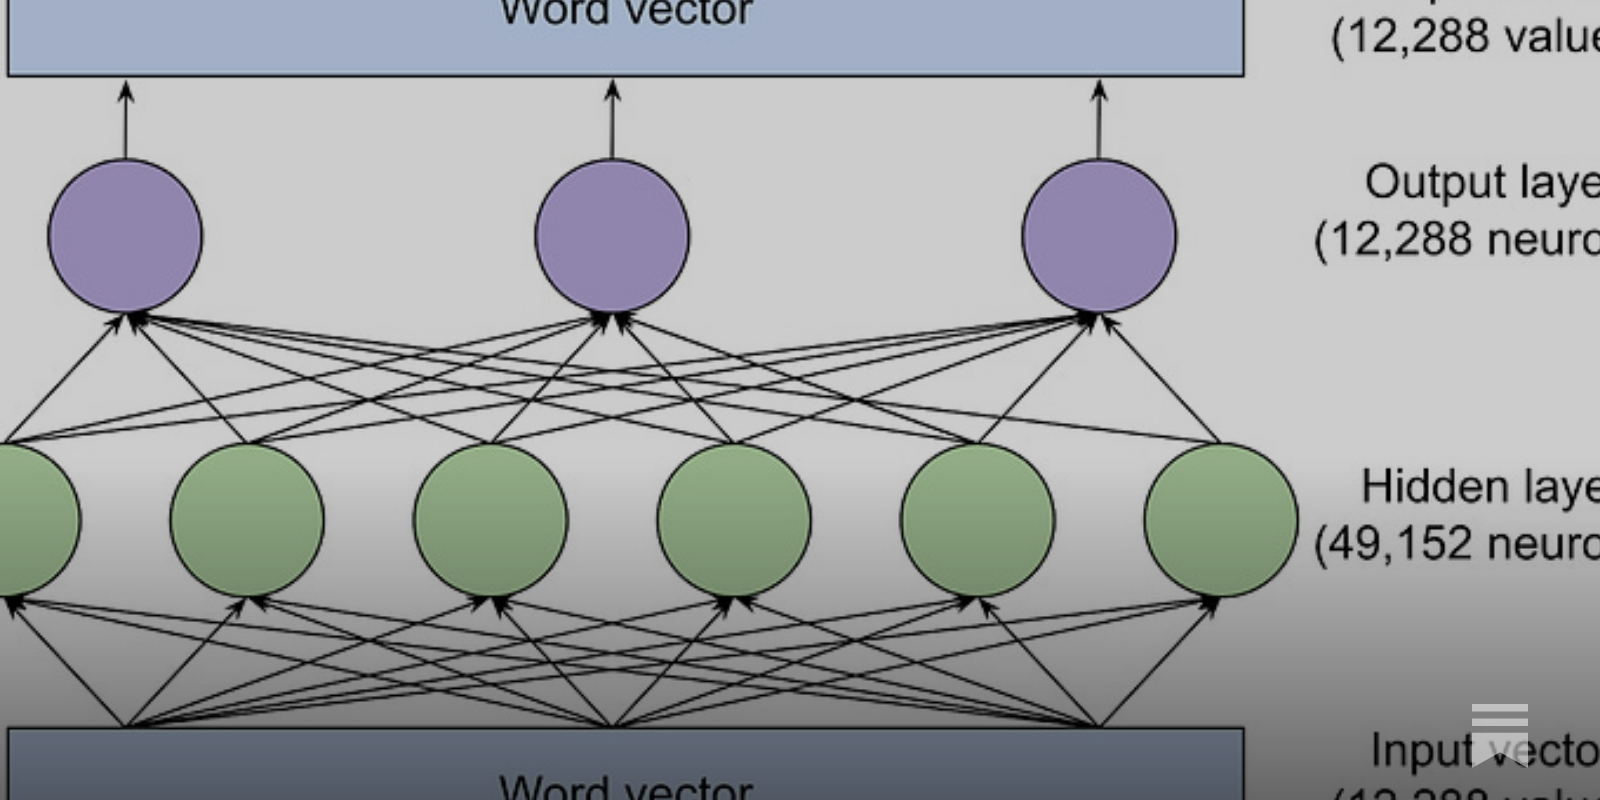 Large language models, explained with a minimum of math and jargon